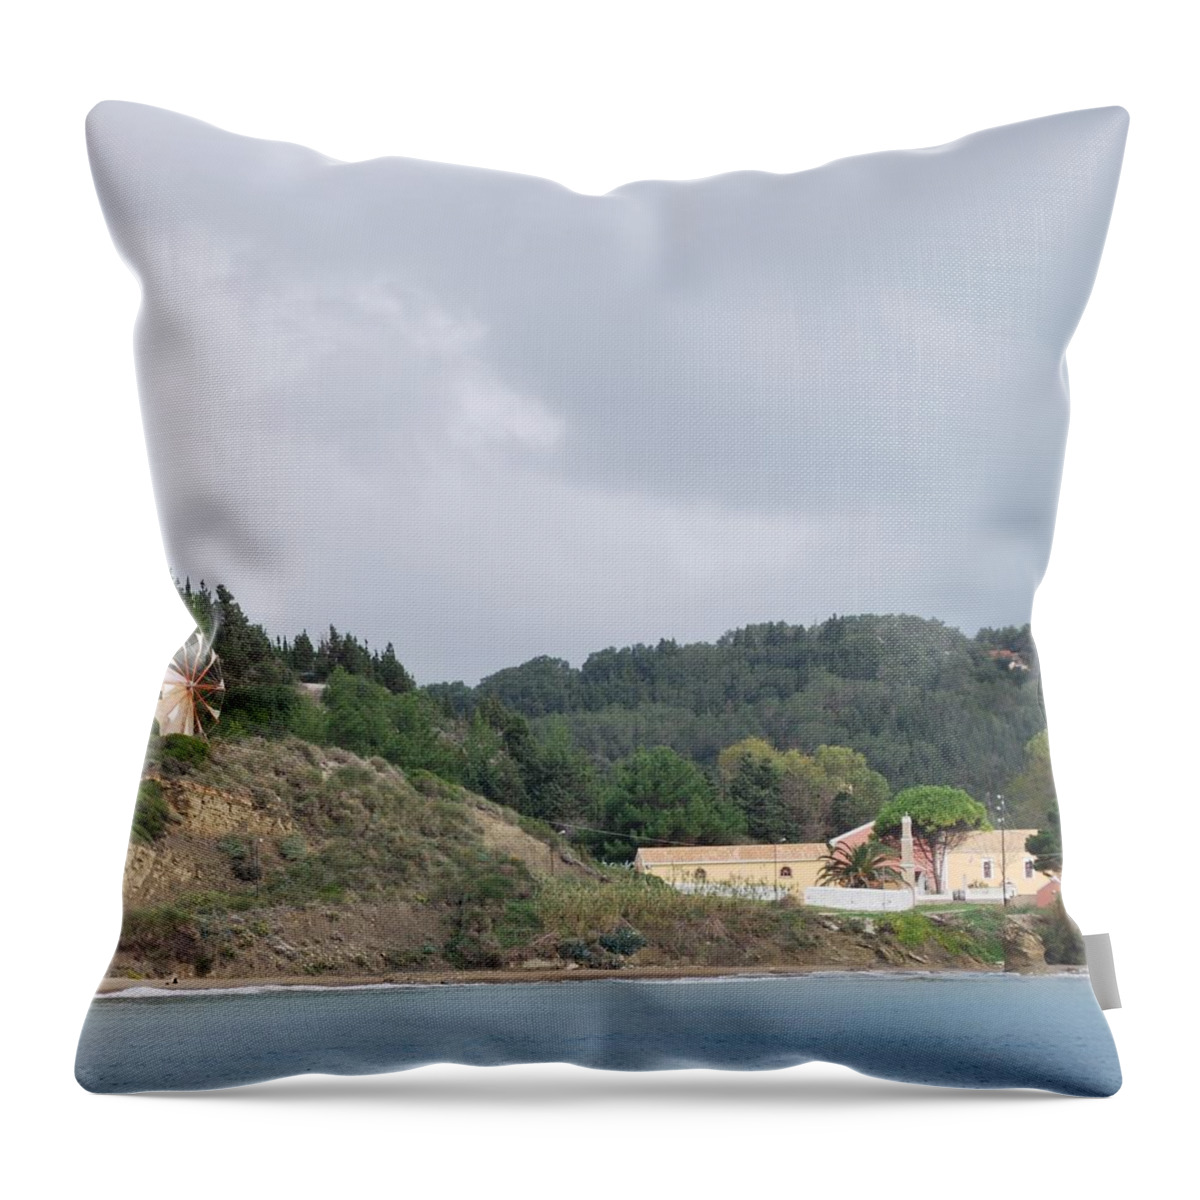 Windmill Throw Pillow featuring the photograph Windmill Built 1830 by George Katechis